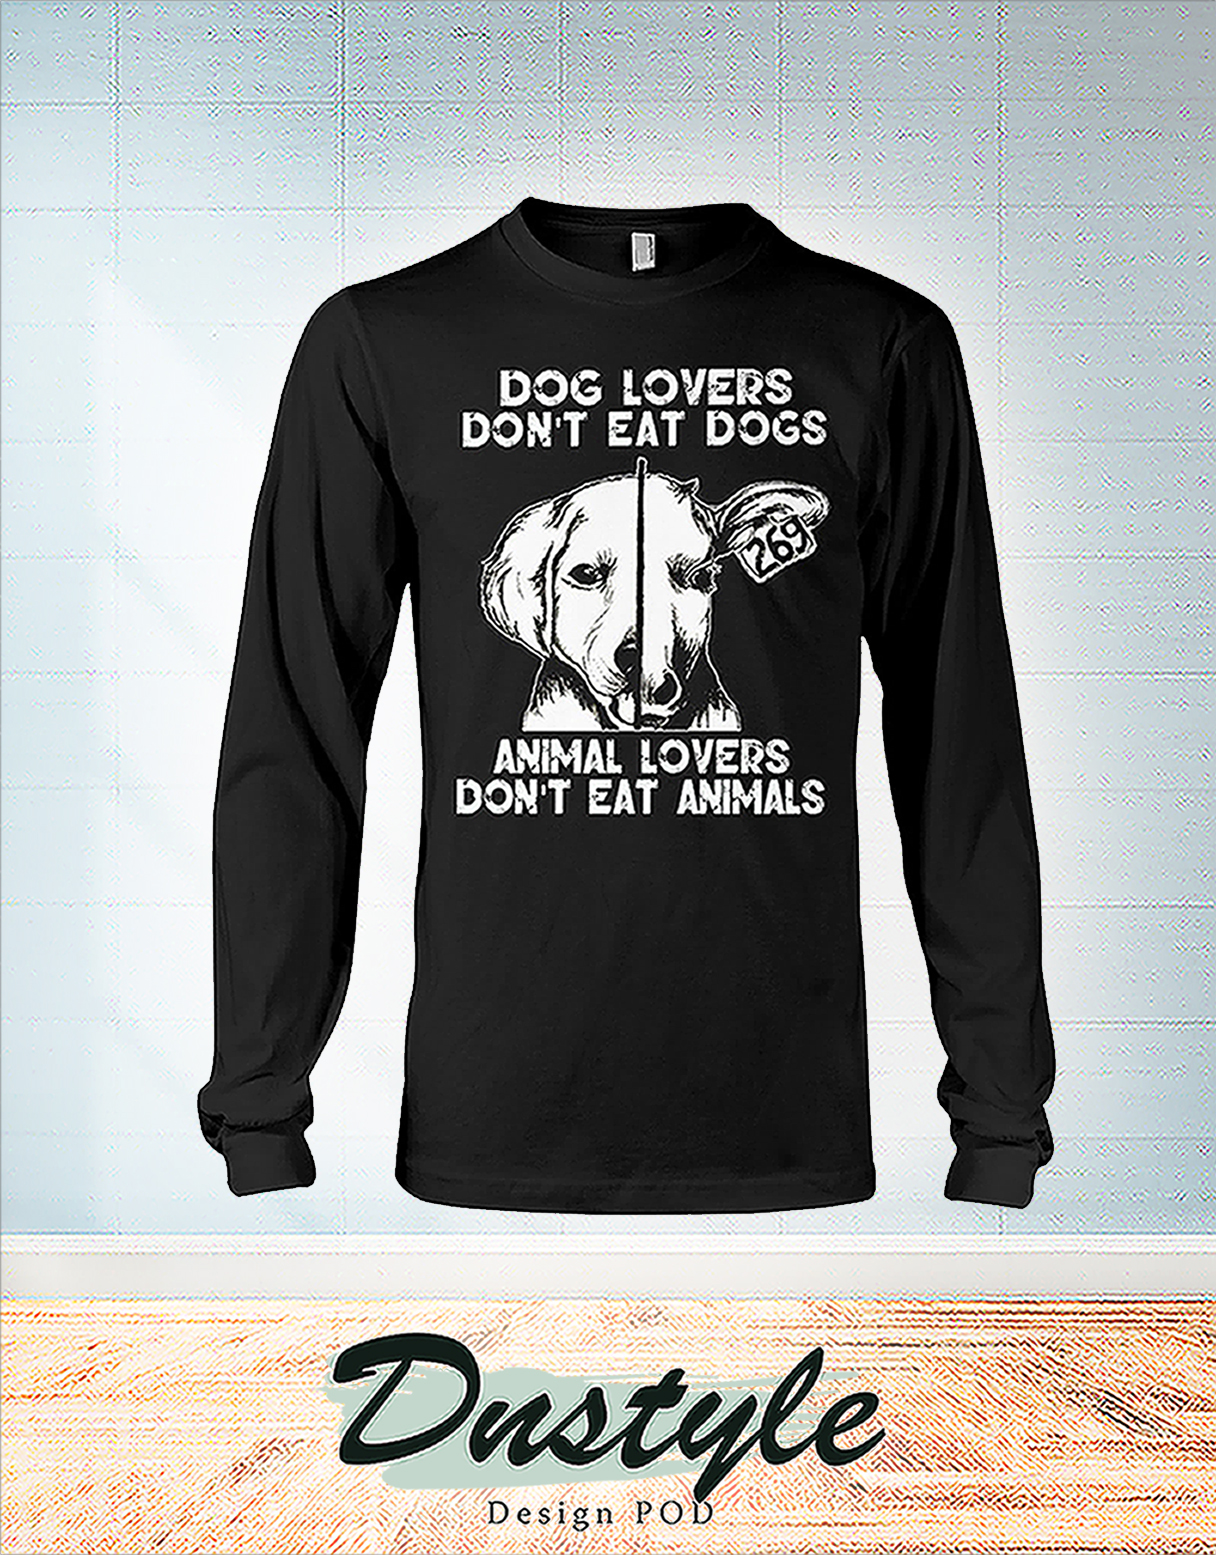 Dog lovers don't eat dogs animal lovers don't eat animals long sleeve